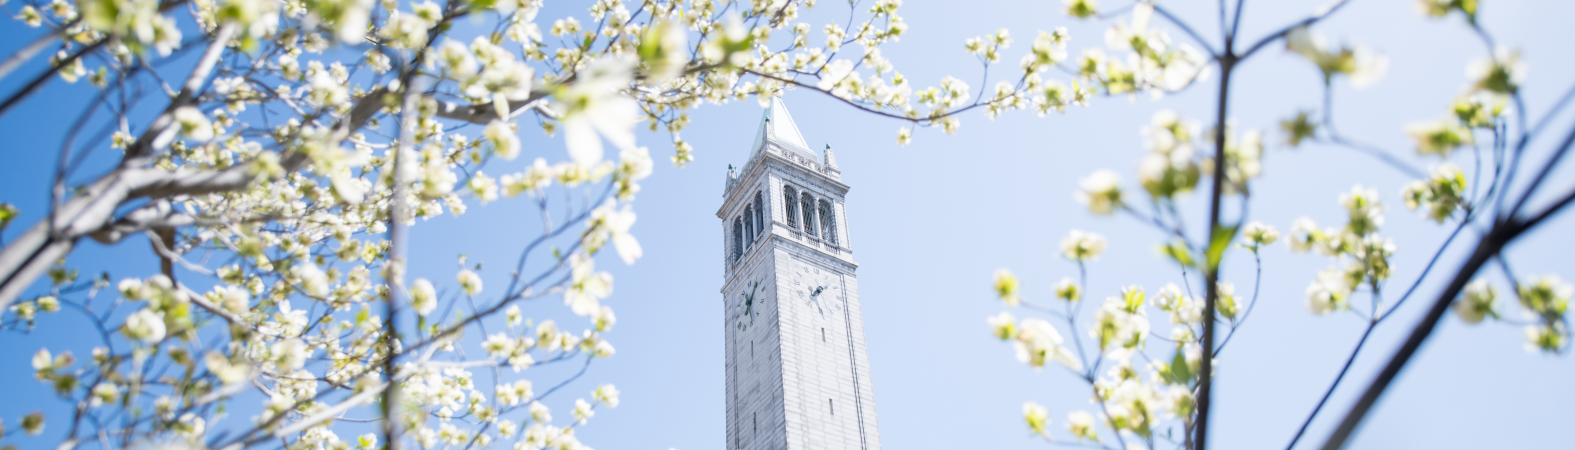 Image of the Campanile framed by white blossom